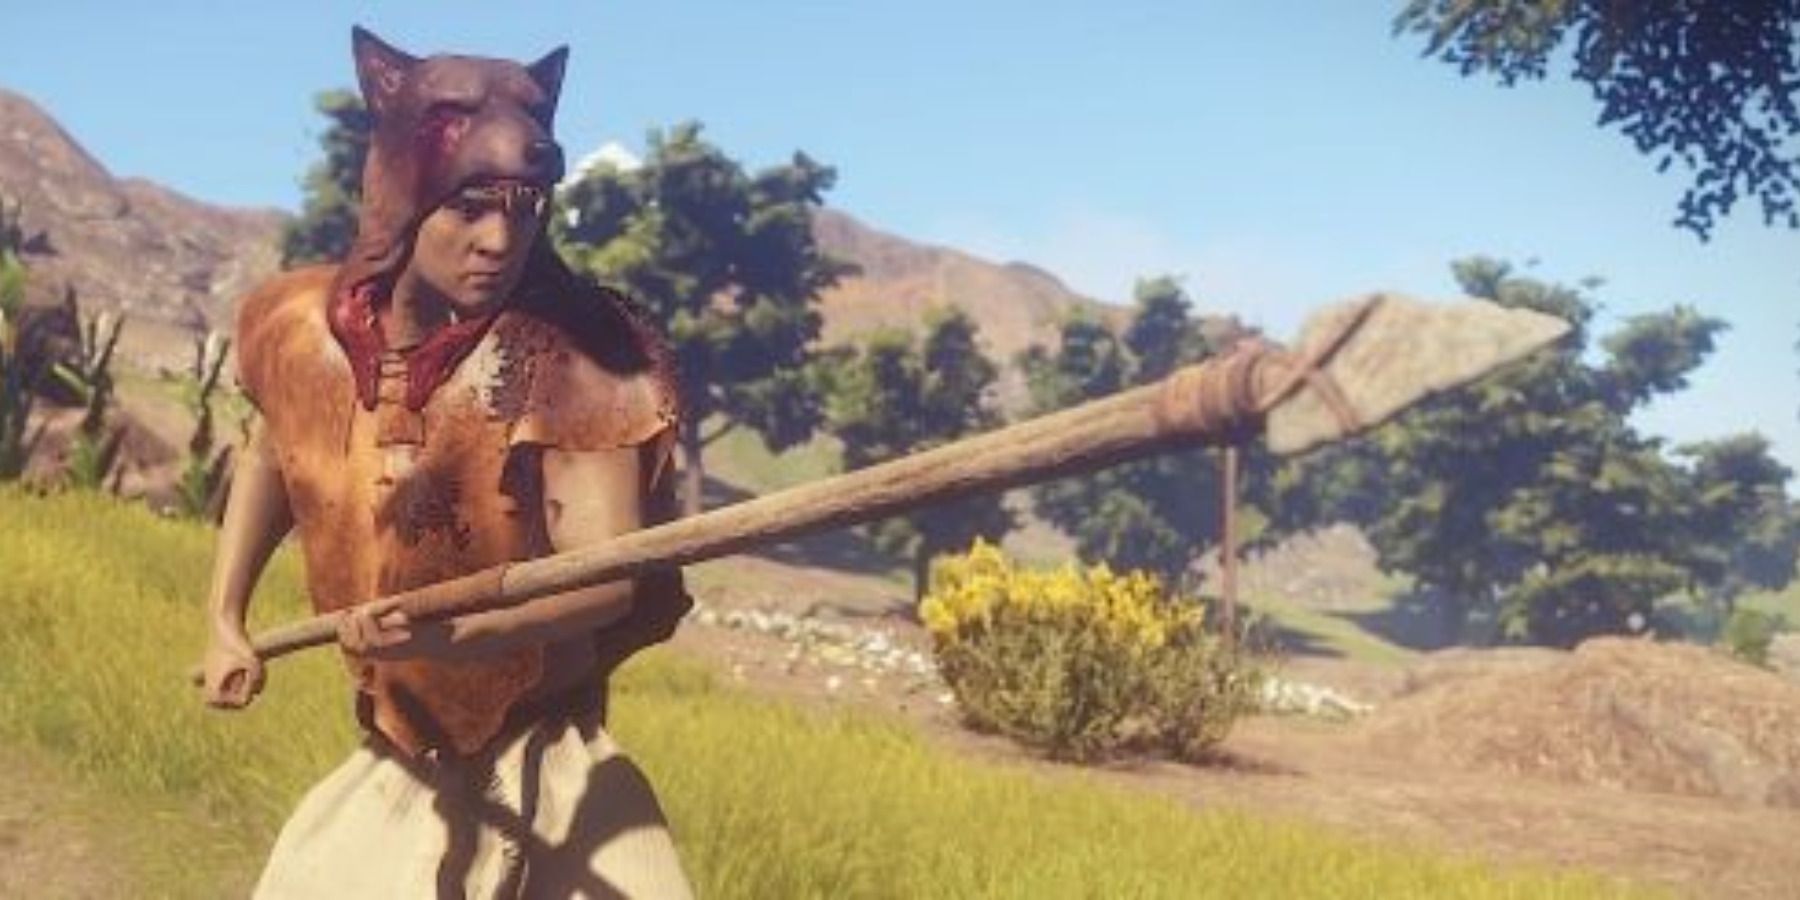 Player using the Wolf Headdress in Rust.